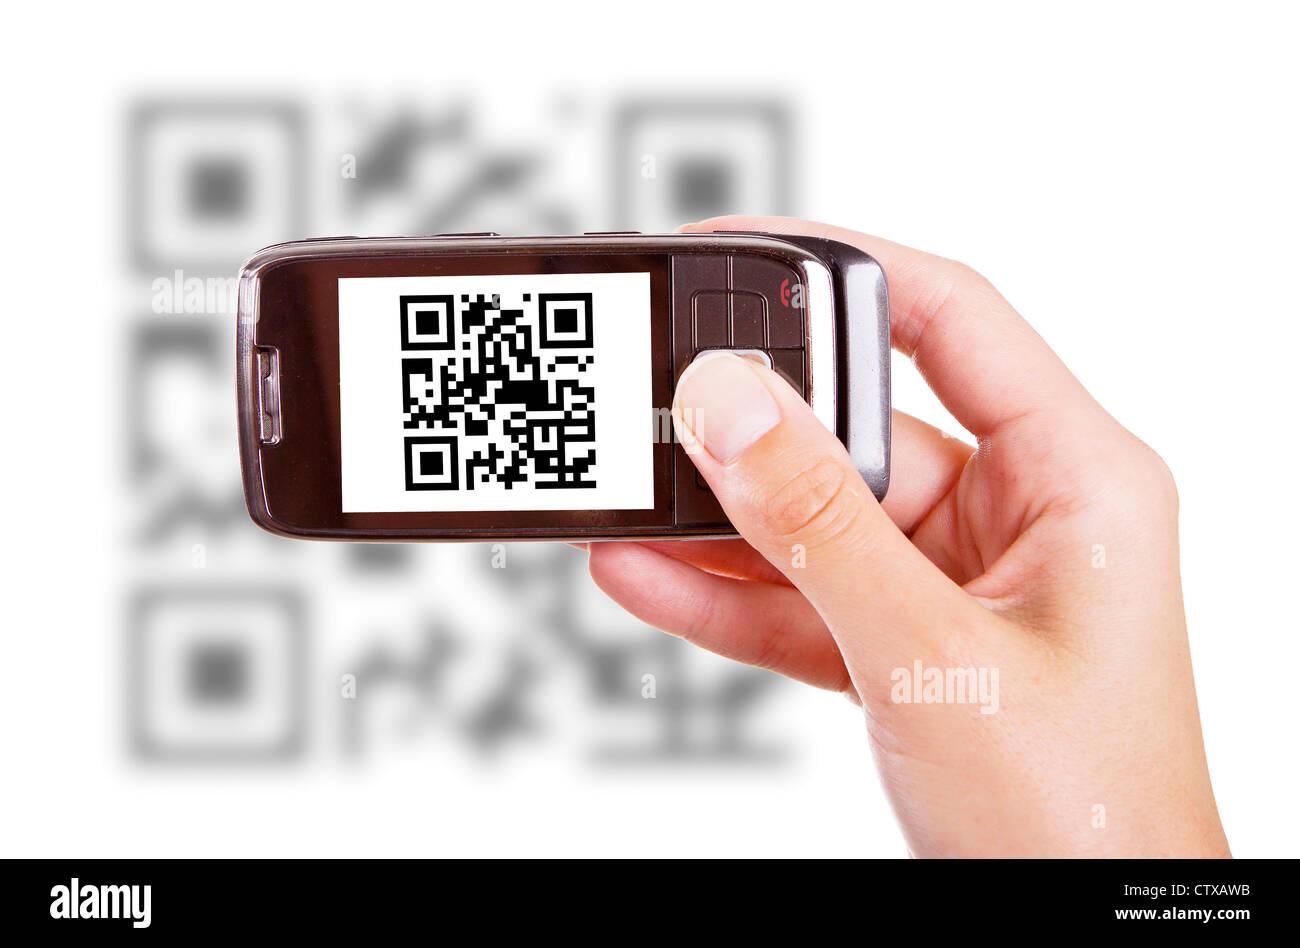 Human hands holding smart phone and scanning QR code Stock Photo